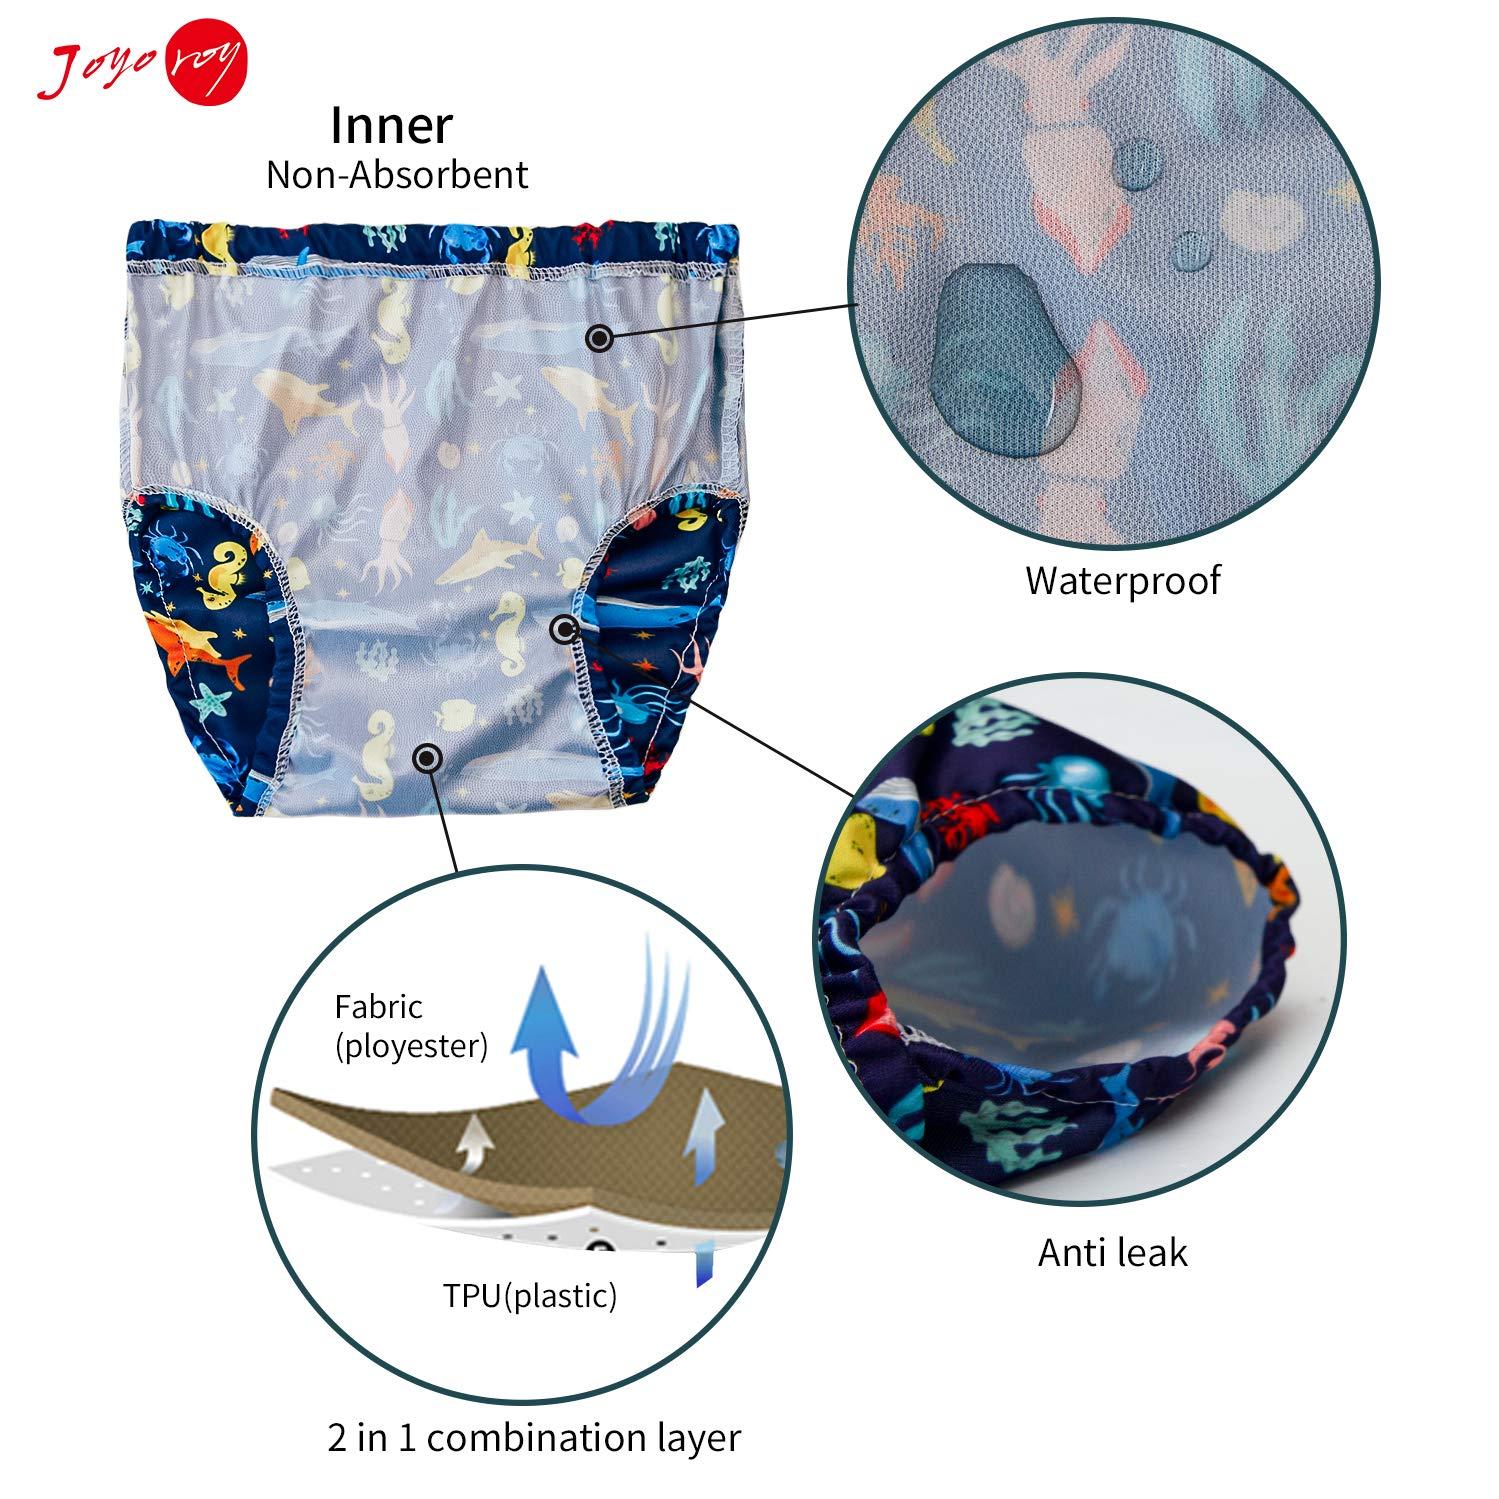 Alternatives to Rubber Pants - Learn about Waterproof Covers